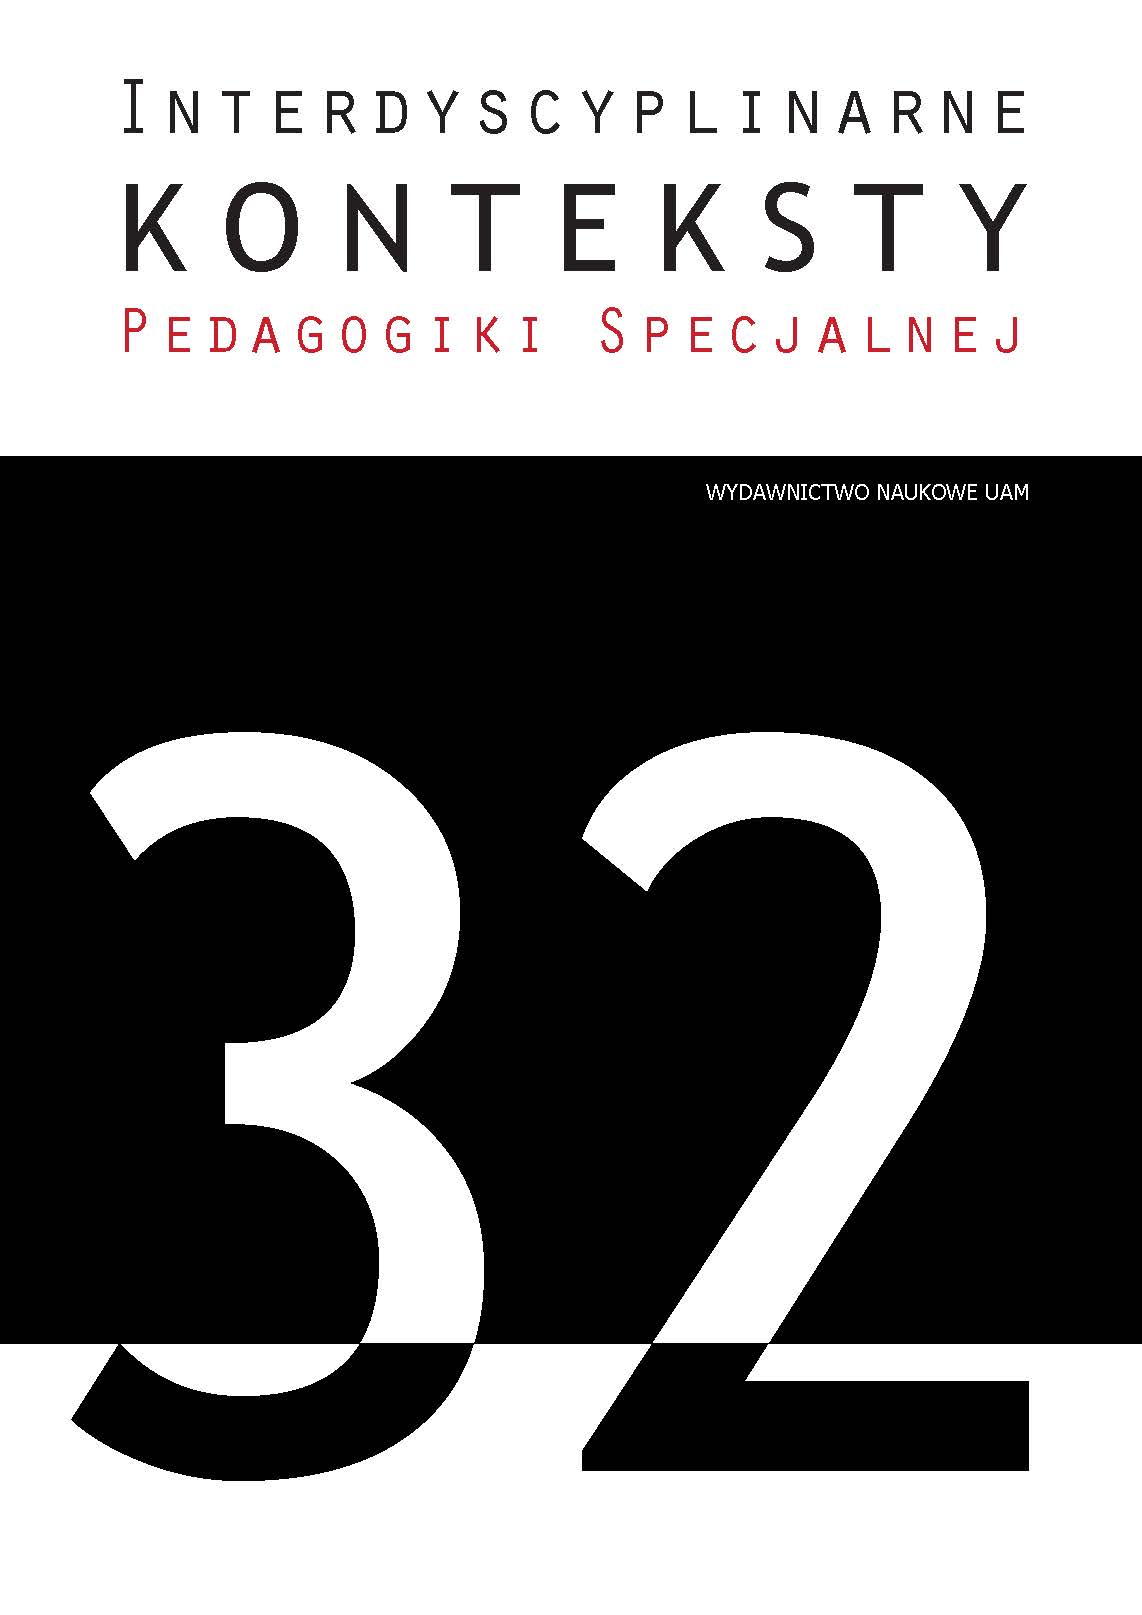 The state of Polish speech pathology and its prospects